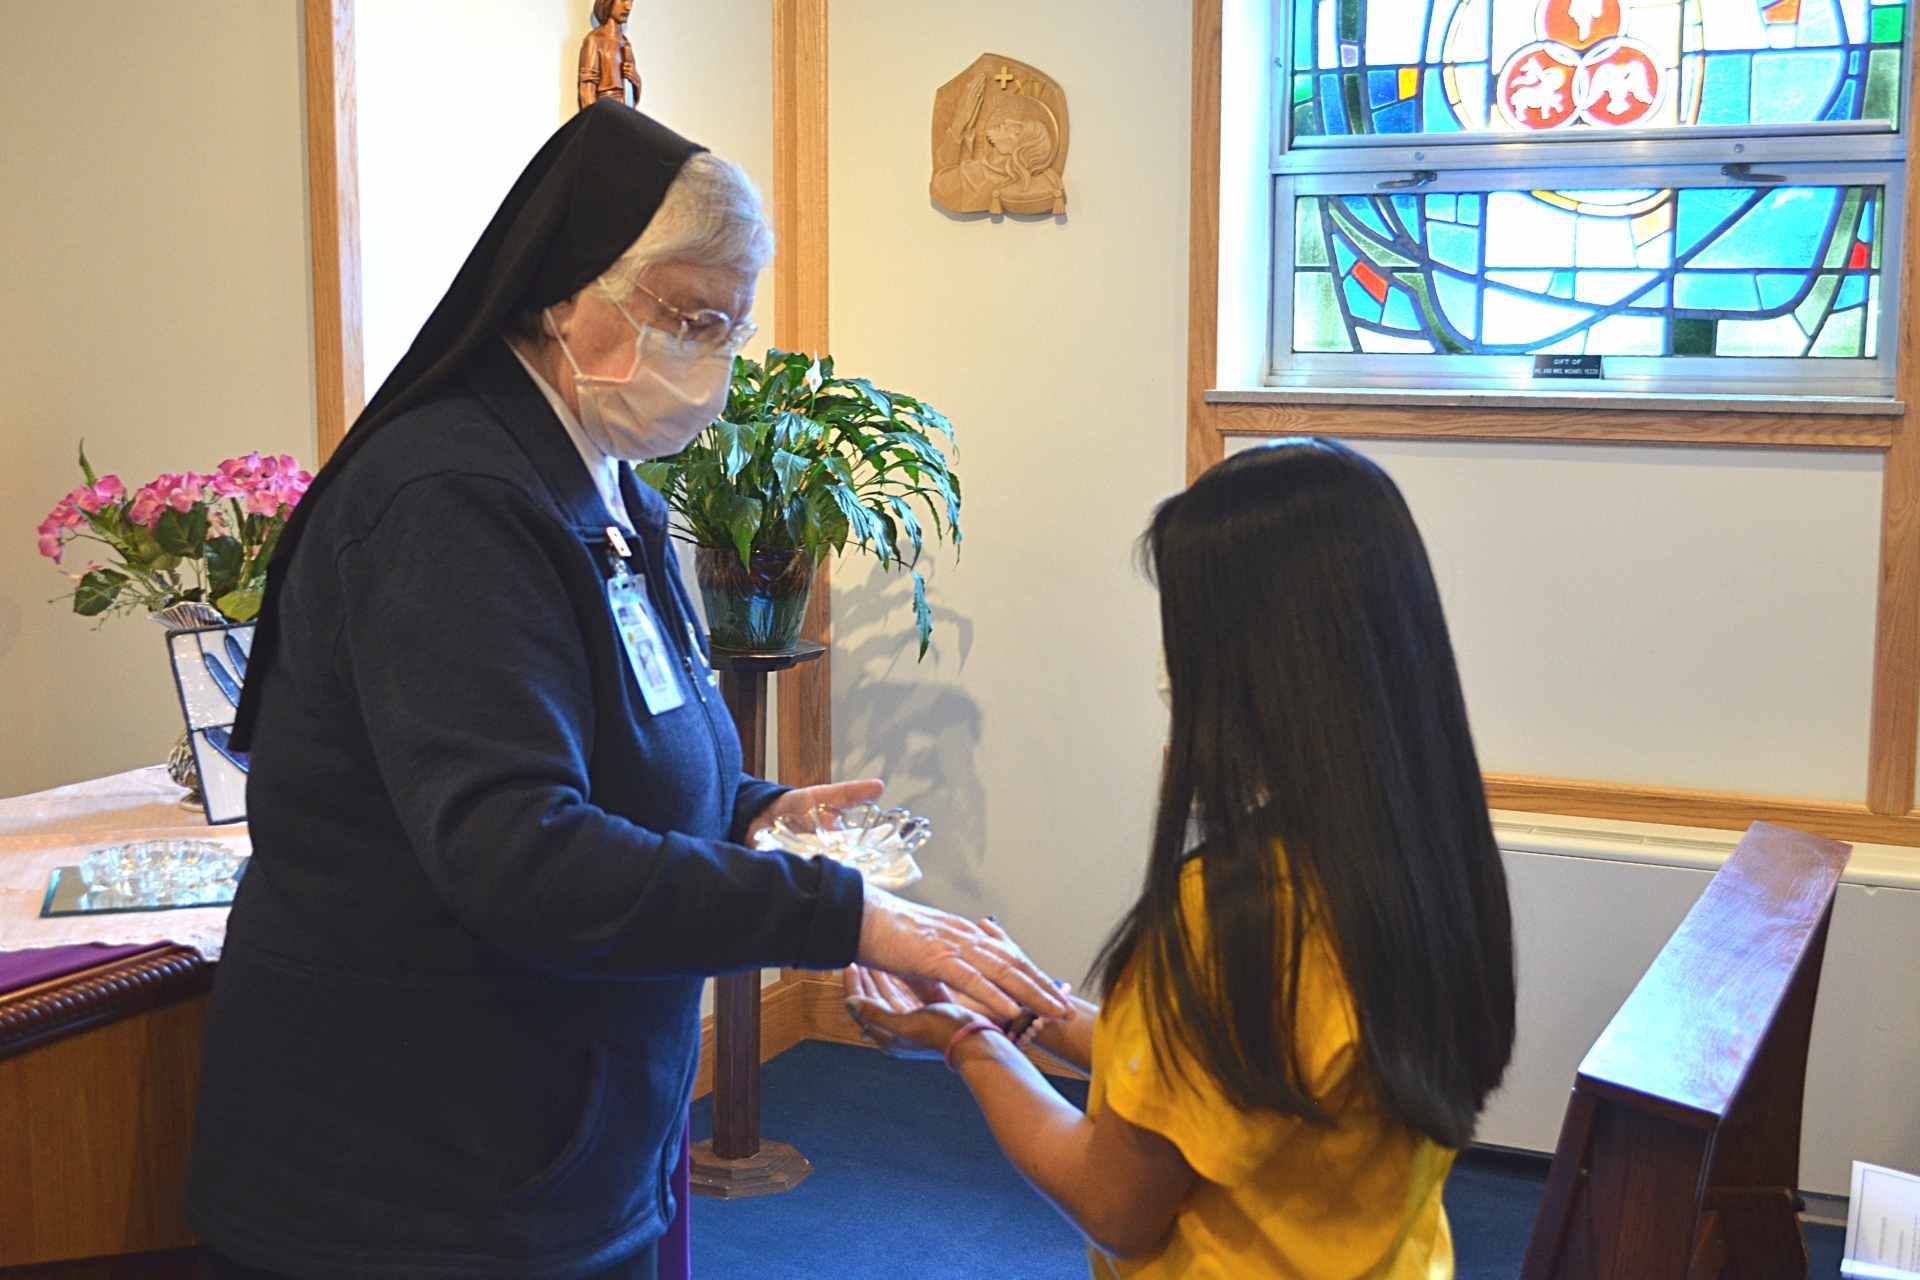 Sister Francesca Lowis, SAC, offers a blessing of the hands Friday to Ariana Long, who will be traveling with the Hands and Hearts for Christ to Guatemala in 2022 on a mission trip.